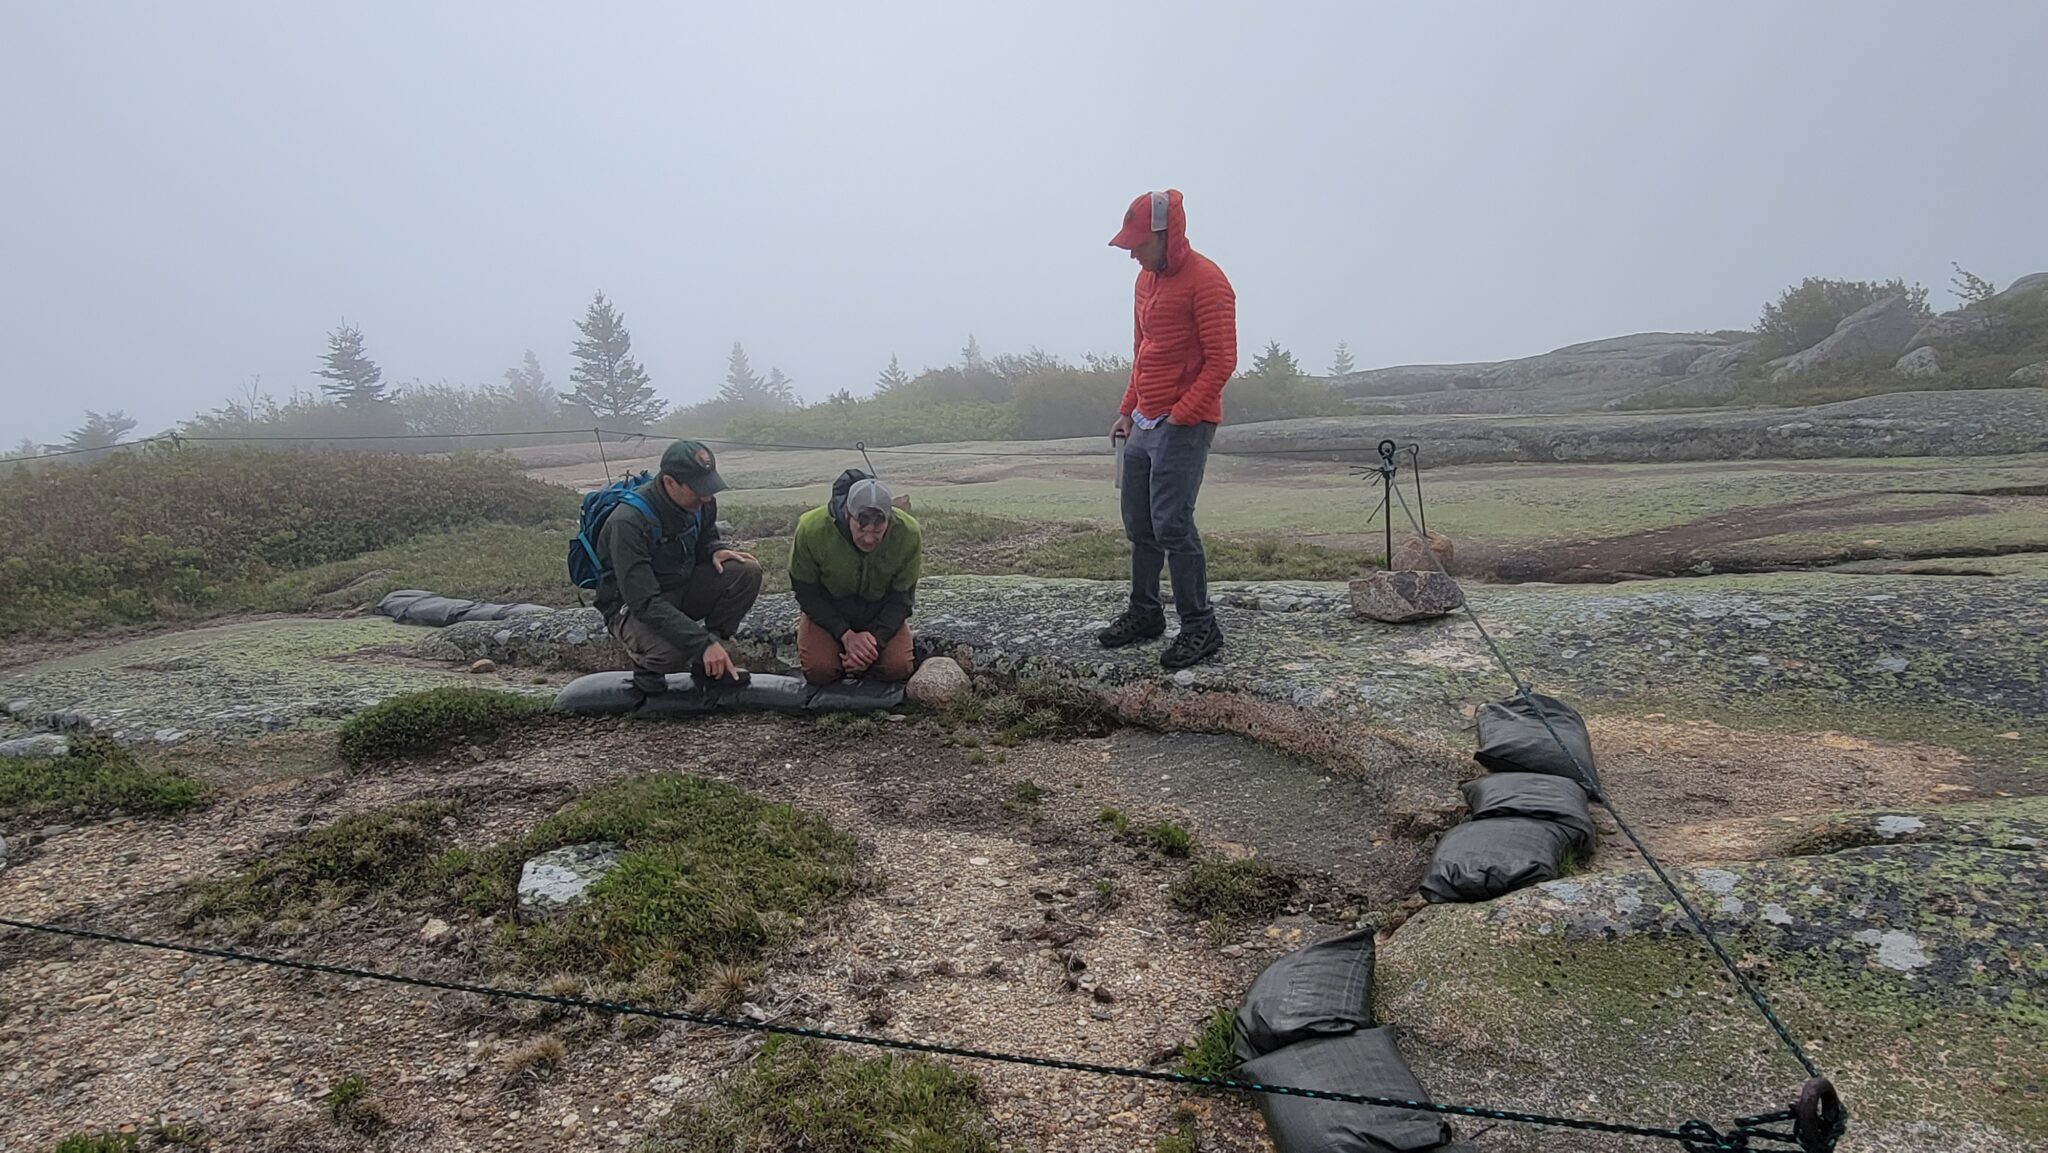 Three people kneel, stand, and squat on the edge of an area where soil and plants have eroded away from the Cadillac summit.